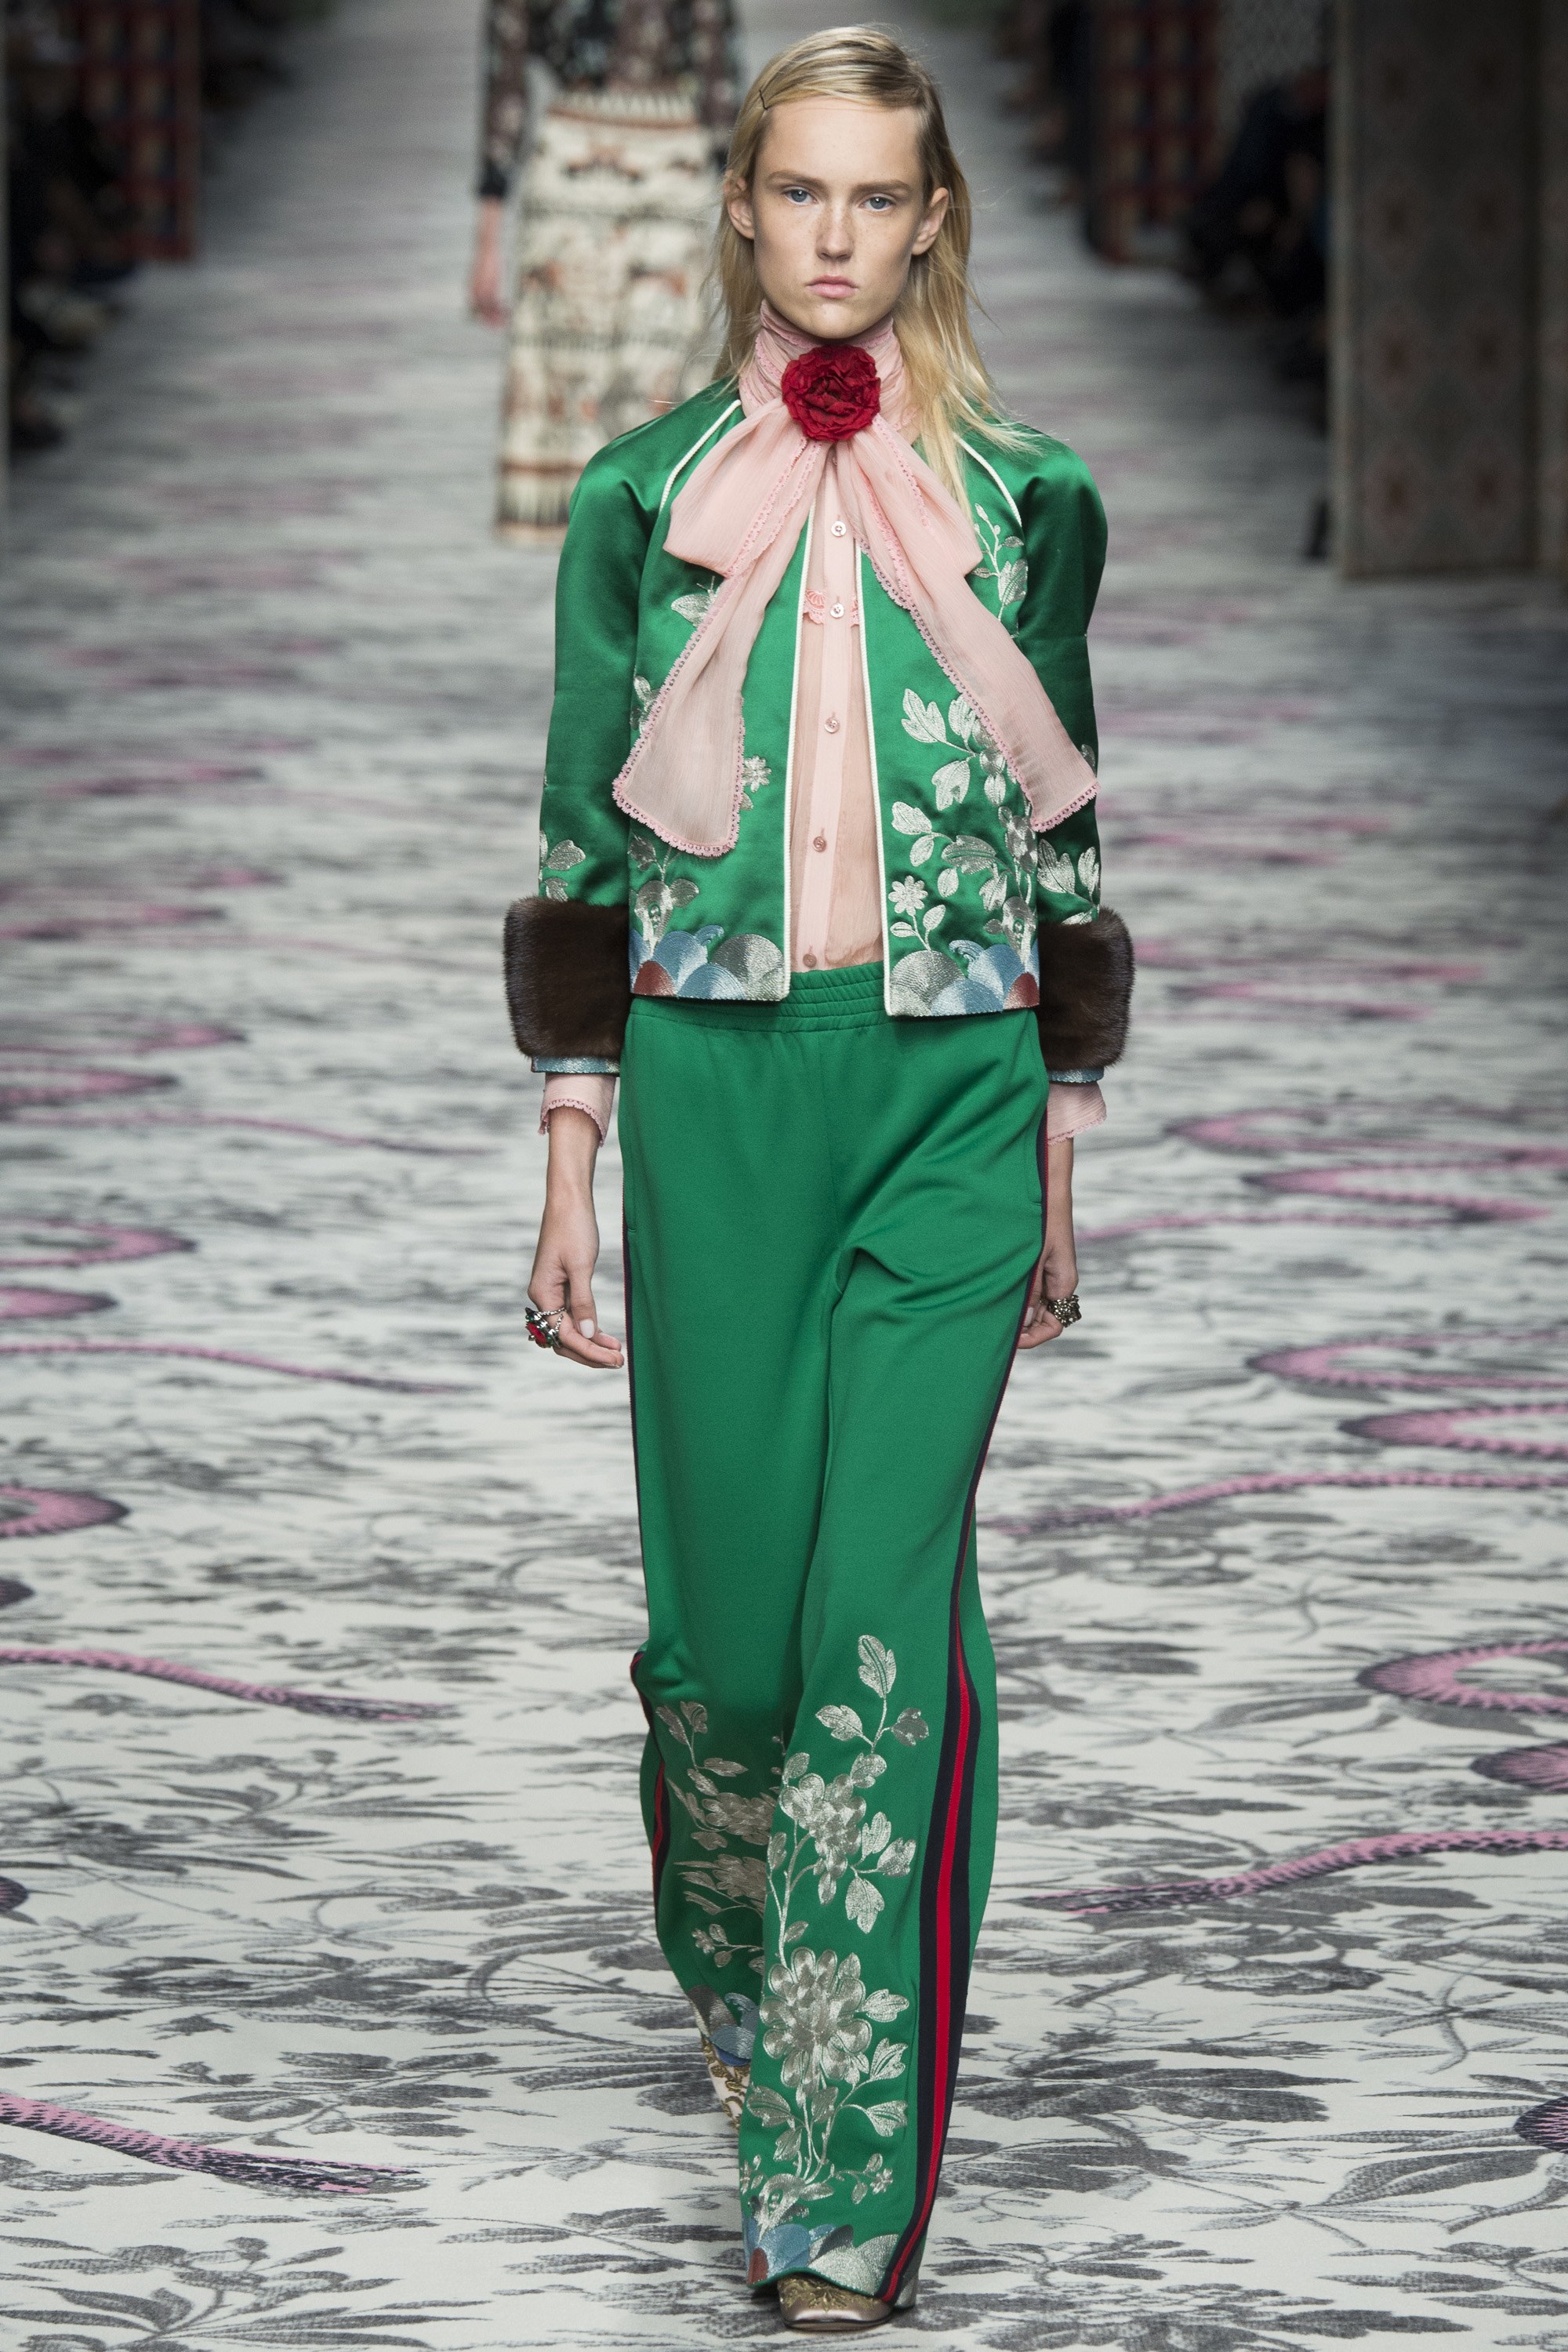 Rihannas-New-York-City-Gucci-Spring-2016-Green-Floral-Embroidered-Track-Jacket-and-Pants.jpg